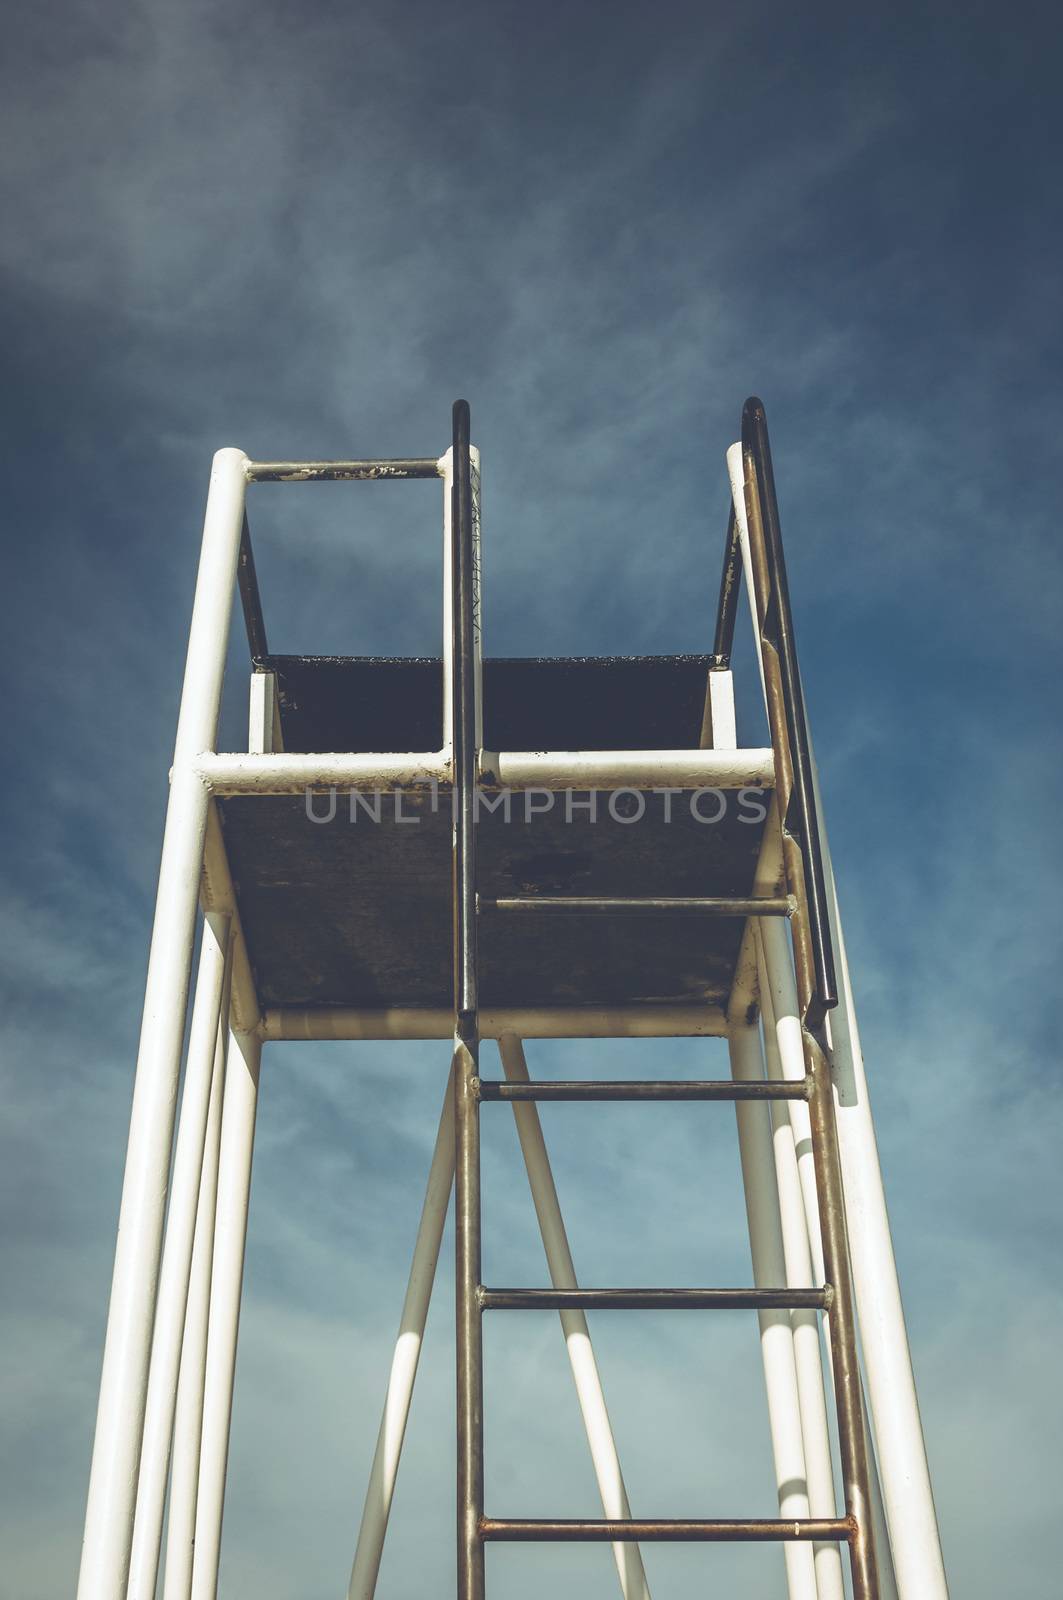 An empty lifeguard tower sits against a blue sky.